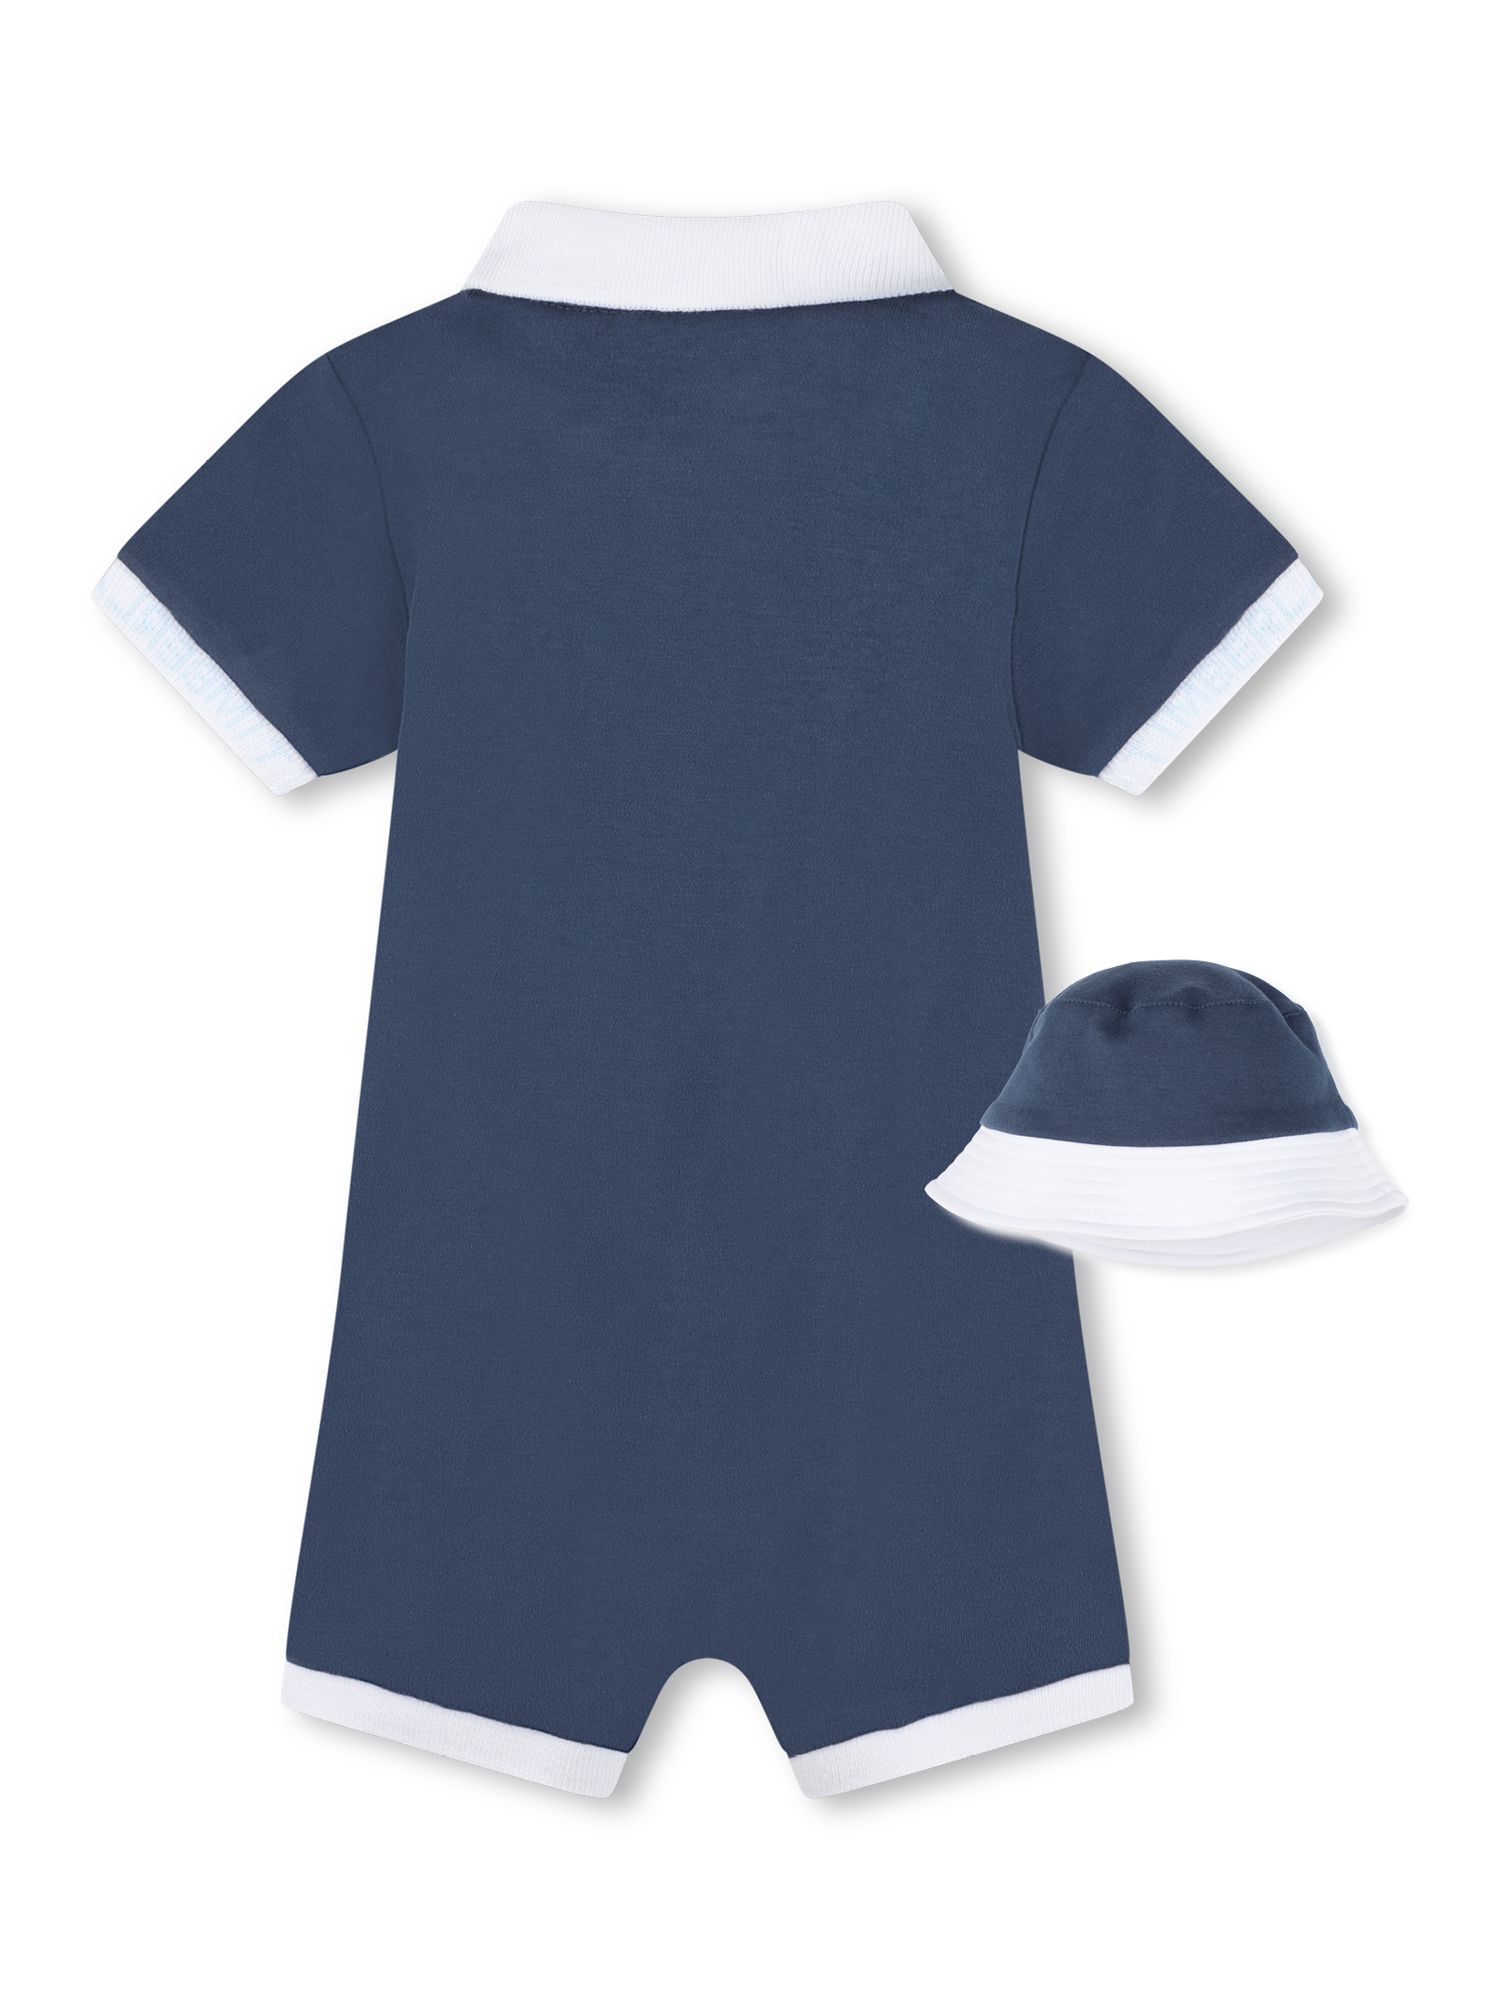 Timberland Baby Overalls & Reversible Hat Set, Navy/White, 3 months